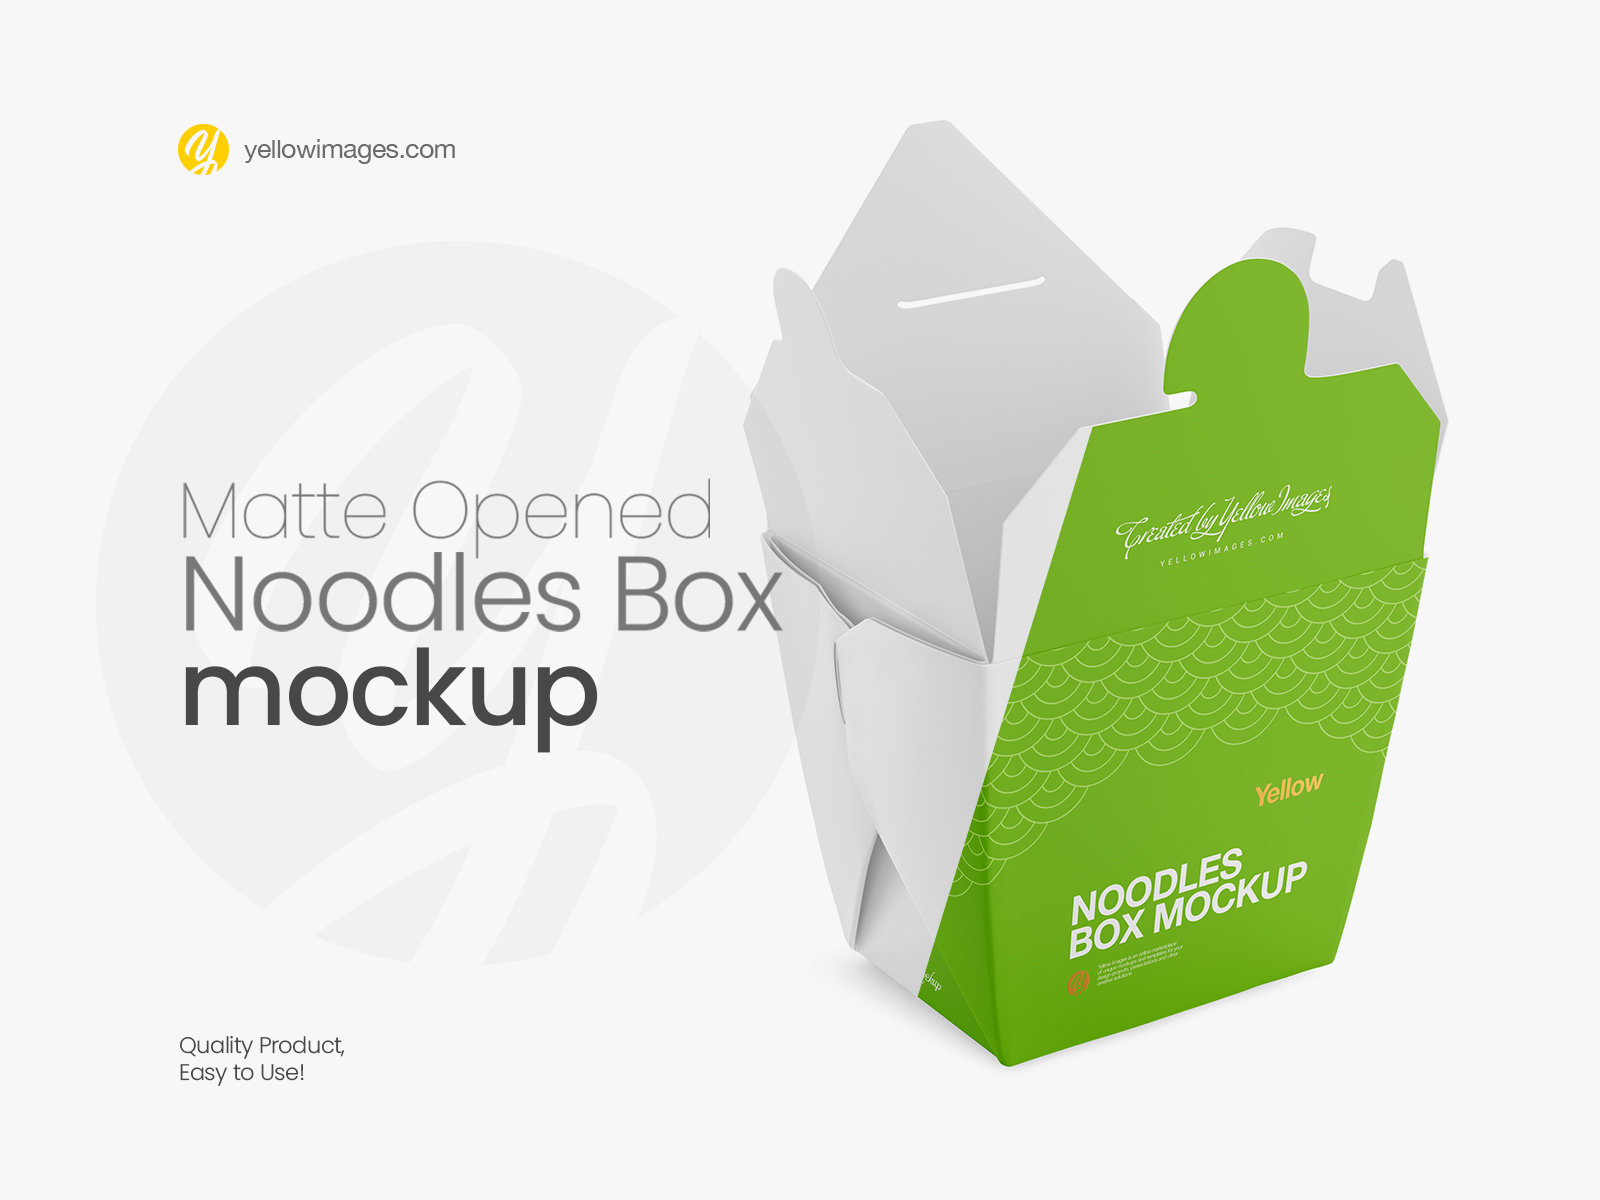 Download Opened Matte Noodles Box Mockup Halfside View By Dmytro Ovcharenko On Dribbble Yellowimages Mockups